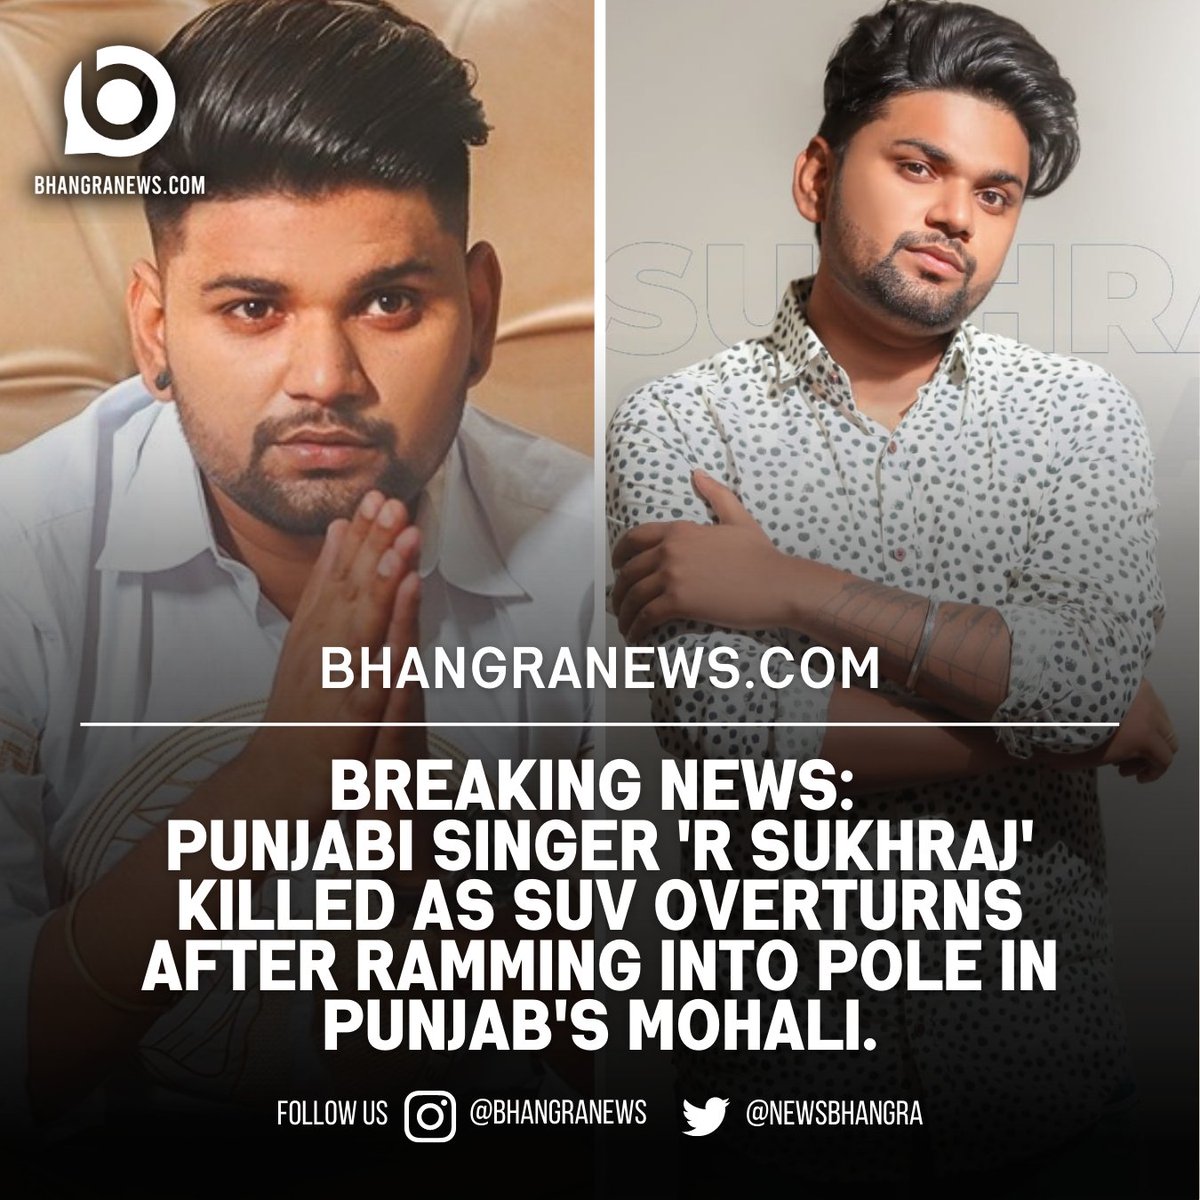 BREAKING NEWS: Punjabi singer @Rsukhraj1 killed as SUV overturns after ramming into pole in Punjab's Mohali. Read the full story: bhangranews.com/breaking-news-… #bhangranews #rsukhraj #punjabisinger #riprsukhraj #punjabimusicindustry #musicnews #PunjabiNews